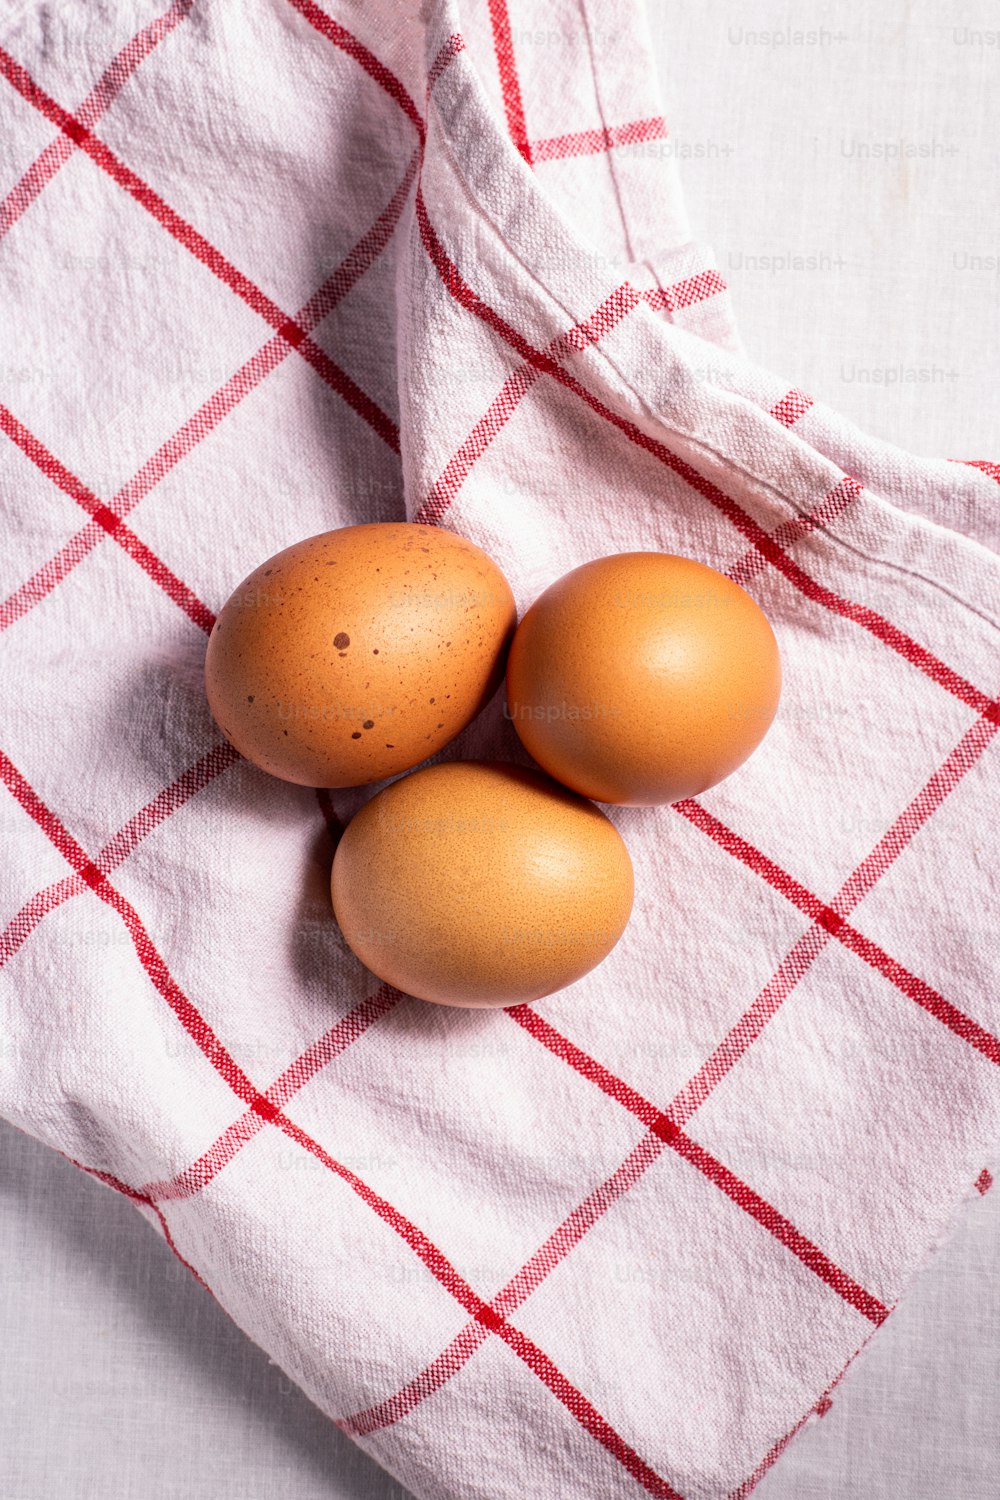 three brown eggs on a red and white checkered towel